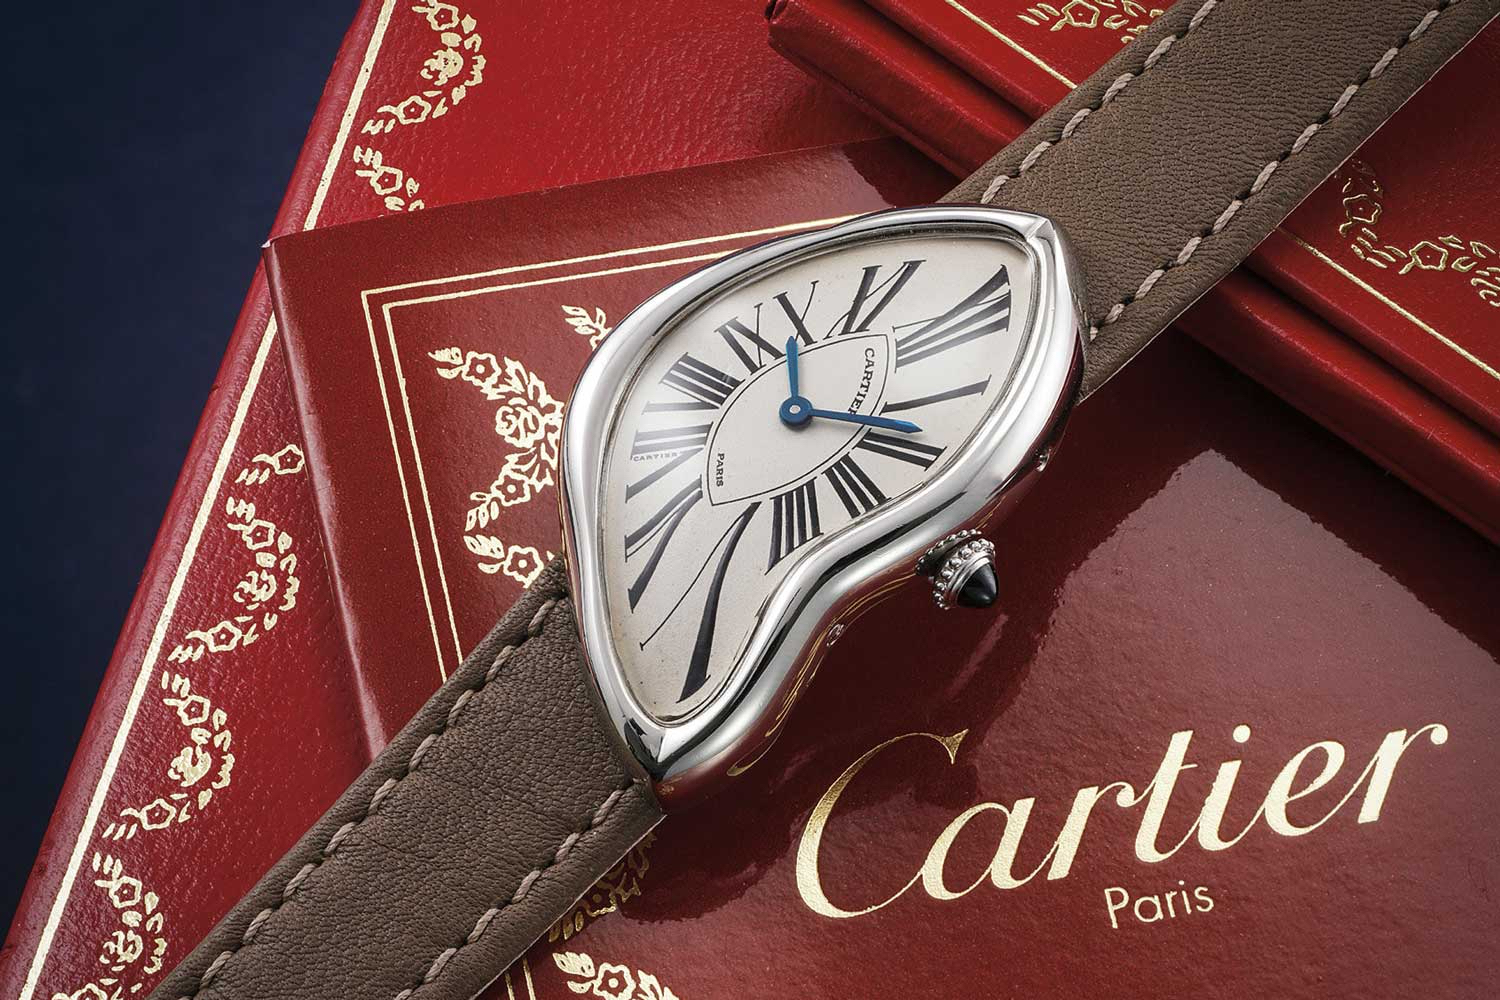 A 1992 Cartier Tank Crash: a highly limited version produced in the early 1990s and cased in platinum - the rarest case metal and most exclusive version of the 1990s Crash, sold through the maison's prestigious Paris boutique; this particular example sold with Phillips at their November 2020 Geneva auction, for CHF258,300 (image: phillips.com)